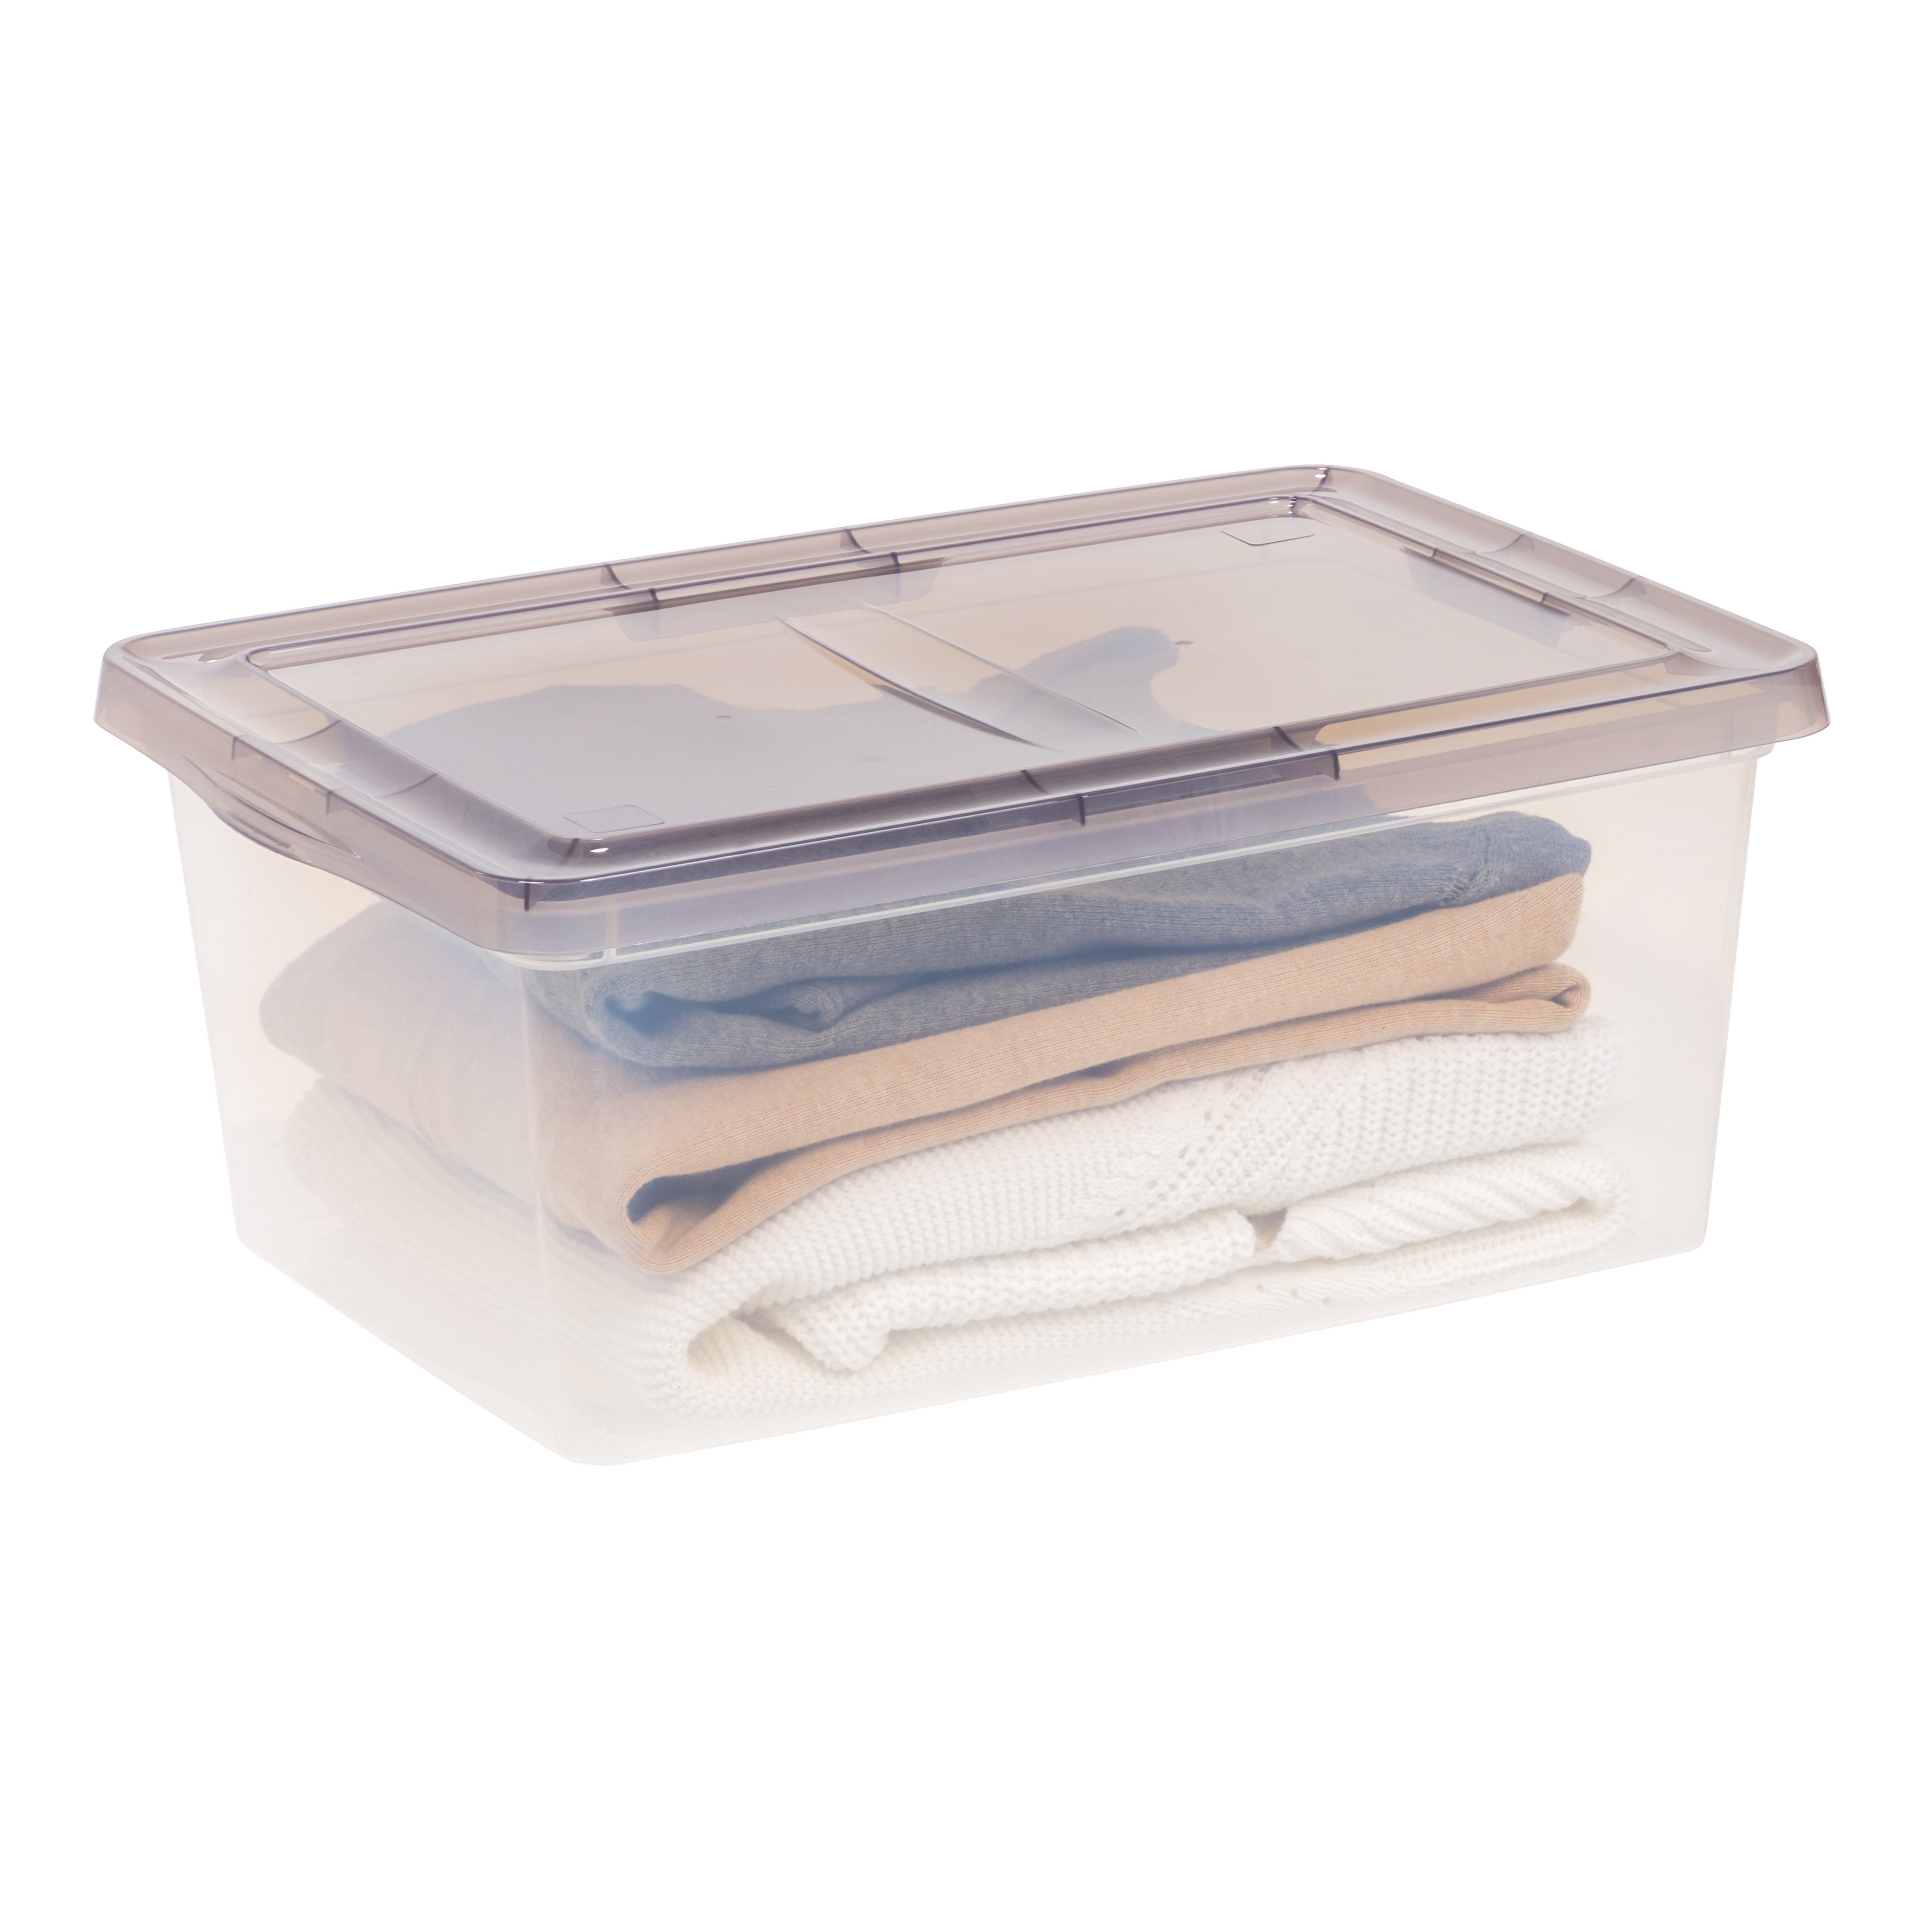 Small Plastic Boxes with Lids - Made in USA Quality!